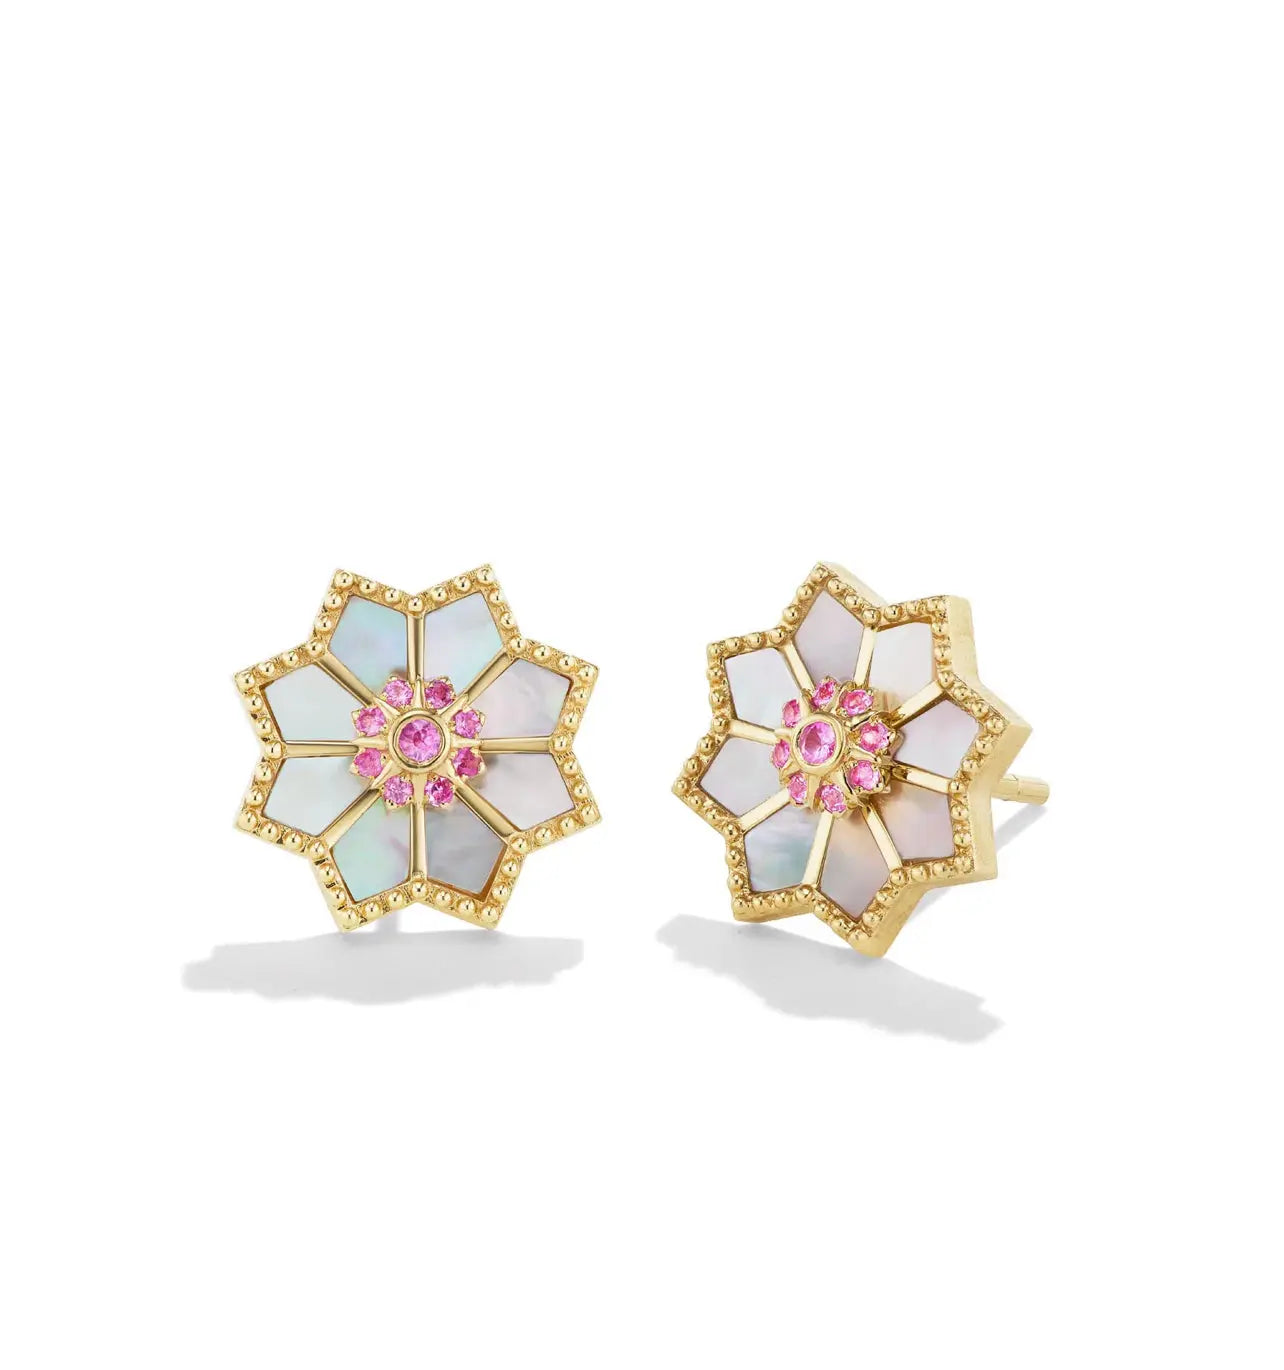 Mother of Pearl and Pink Sapphire Fez Stud Earrings - Squash Blossom Vail